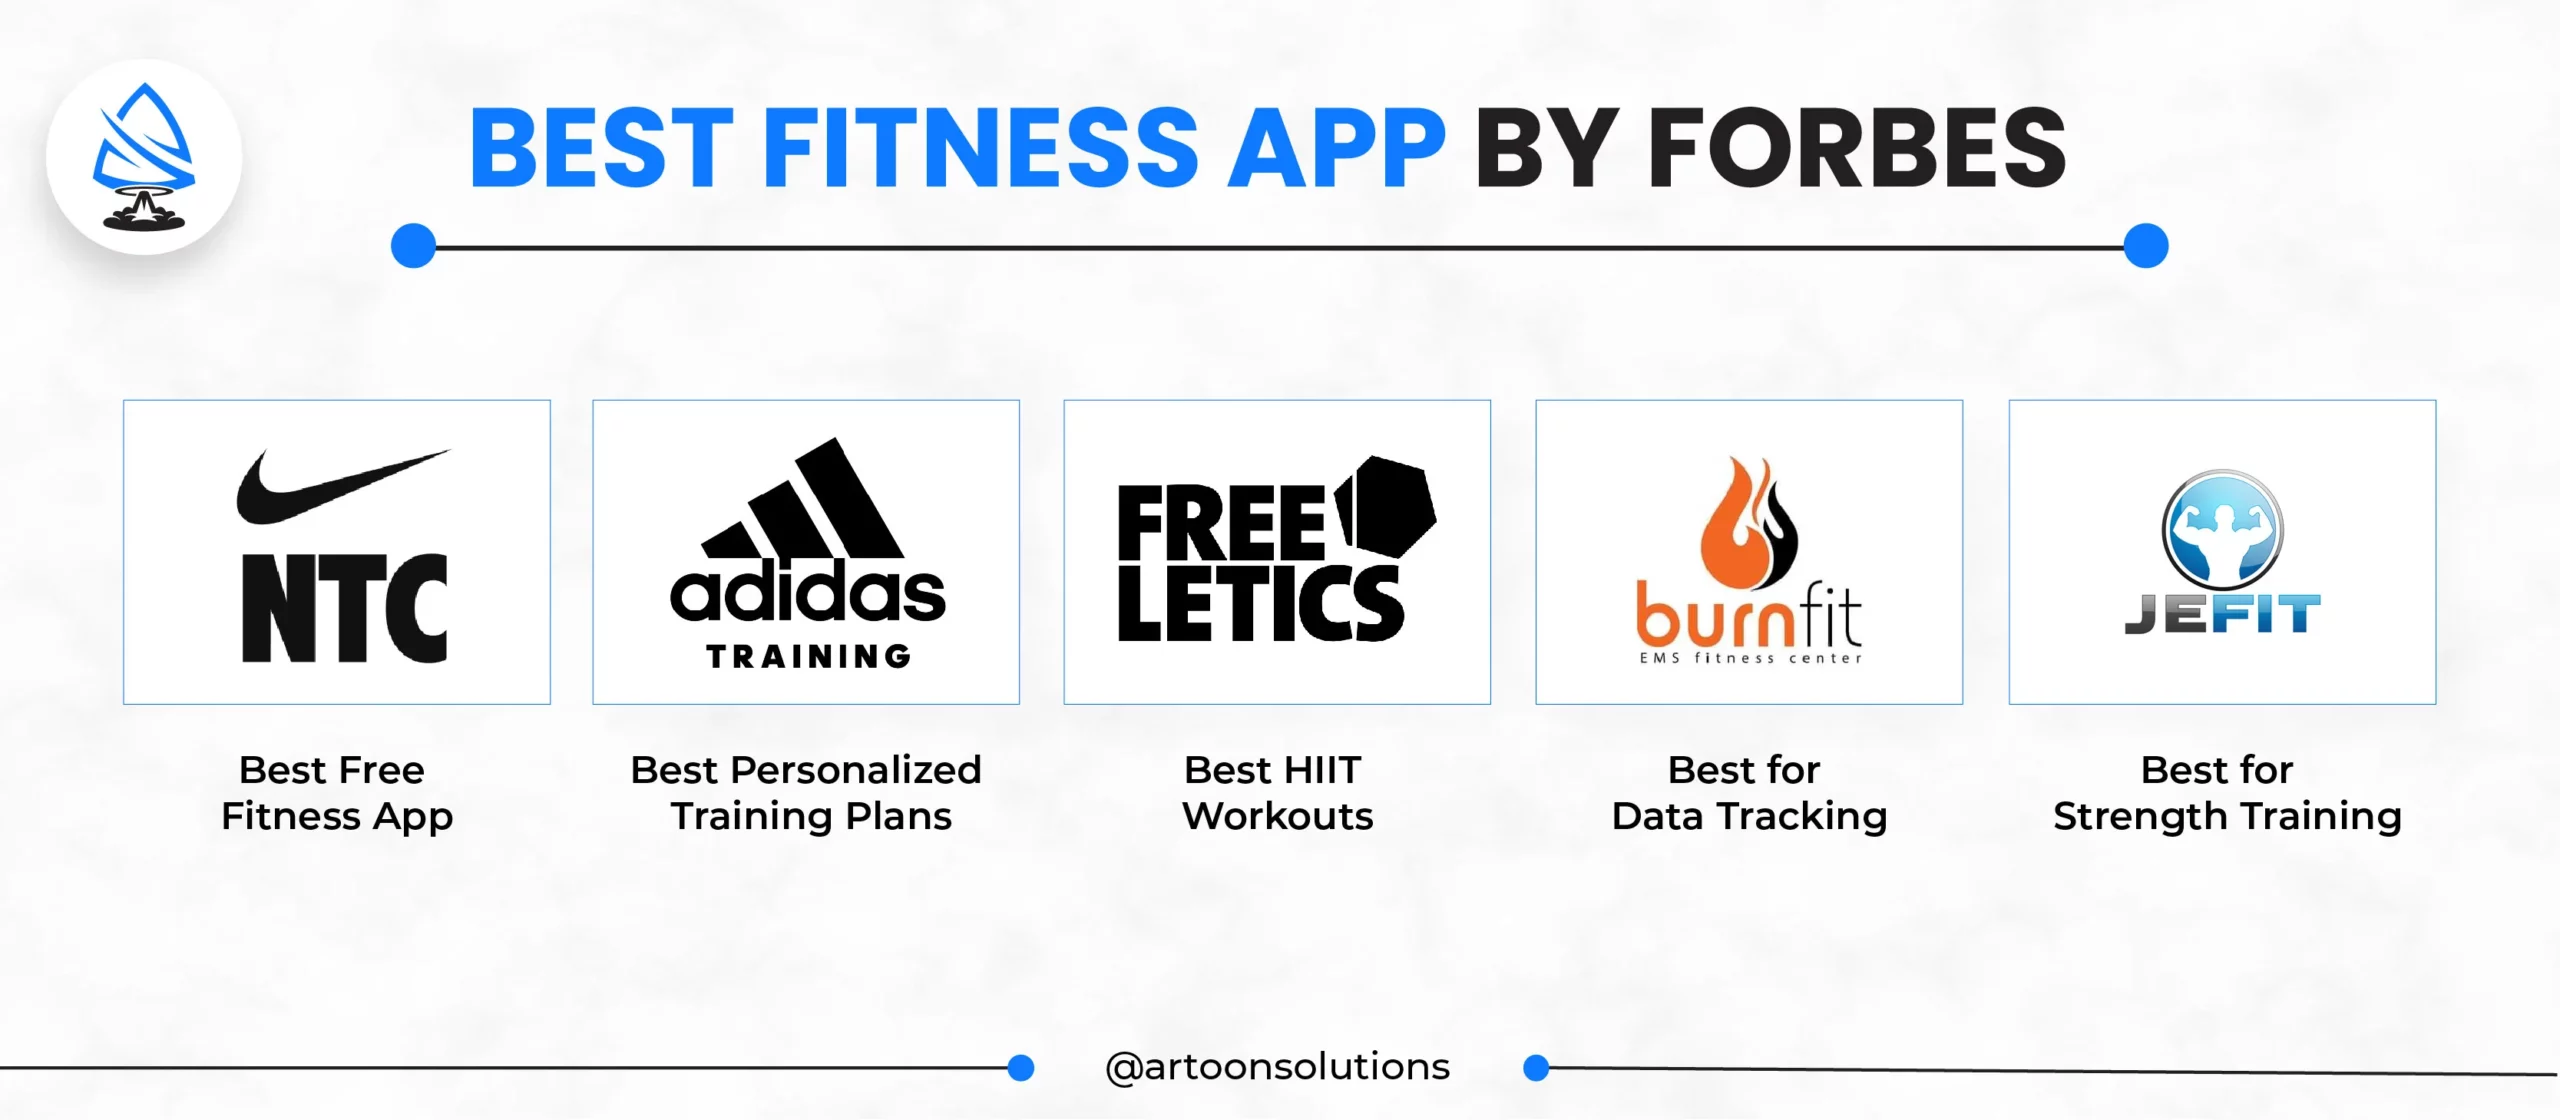 Best Fitness Apps in forbes